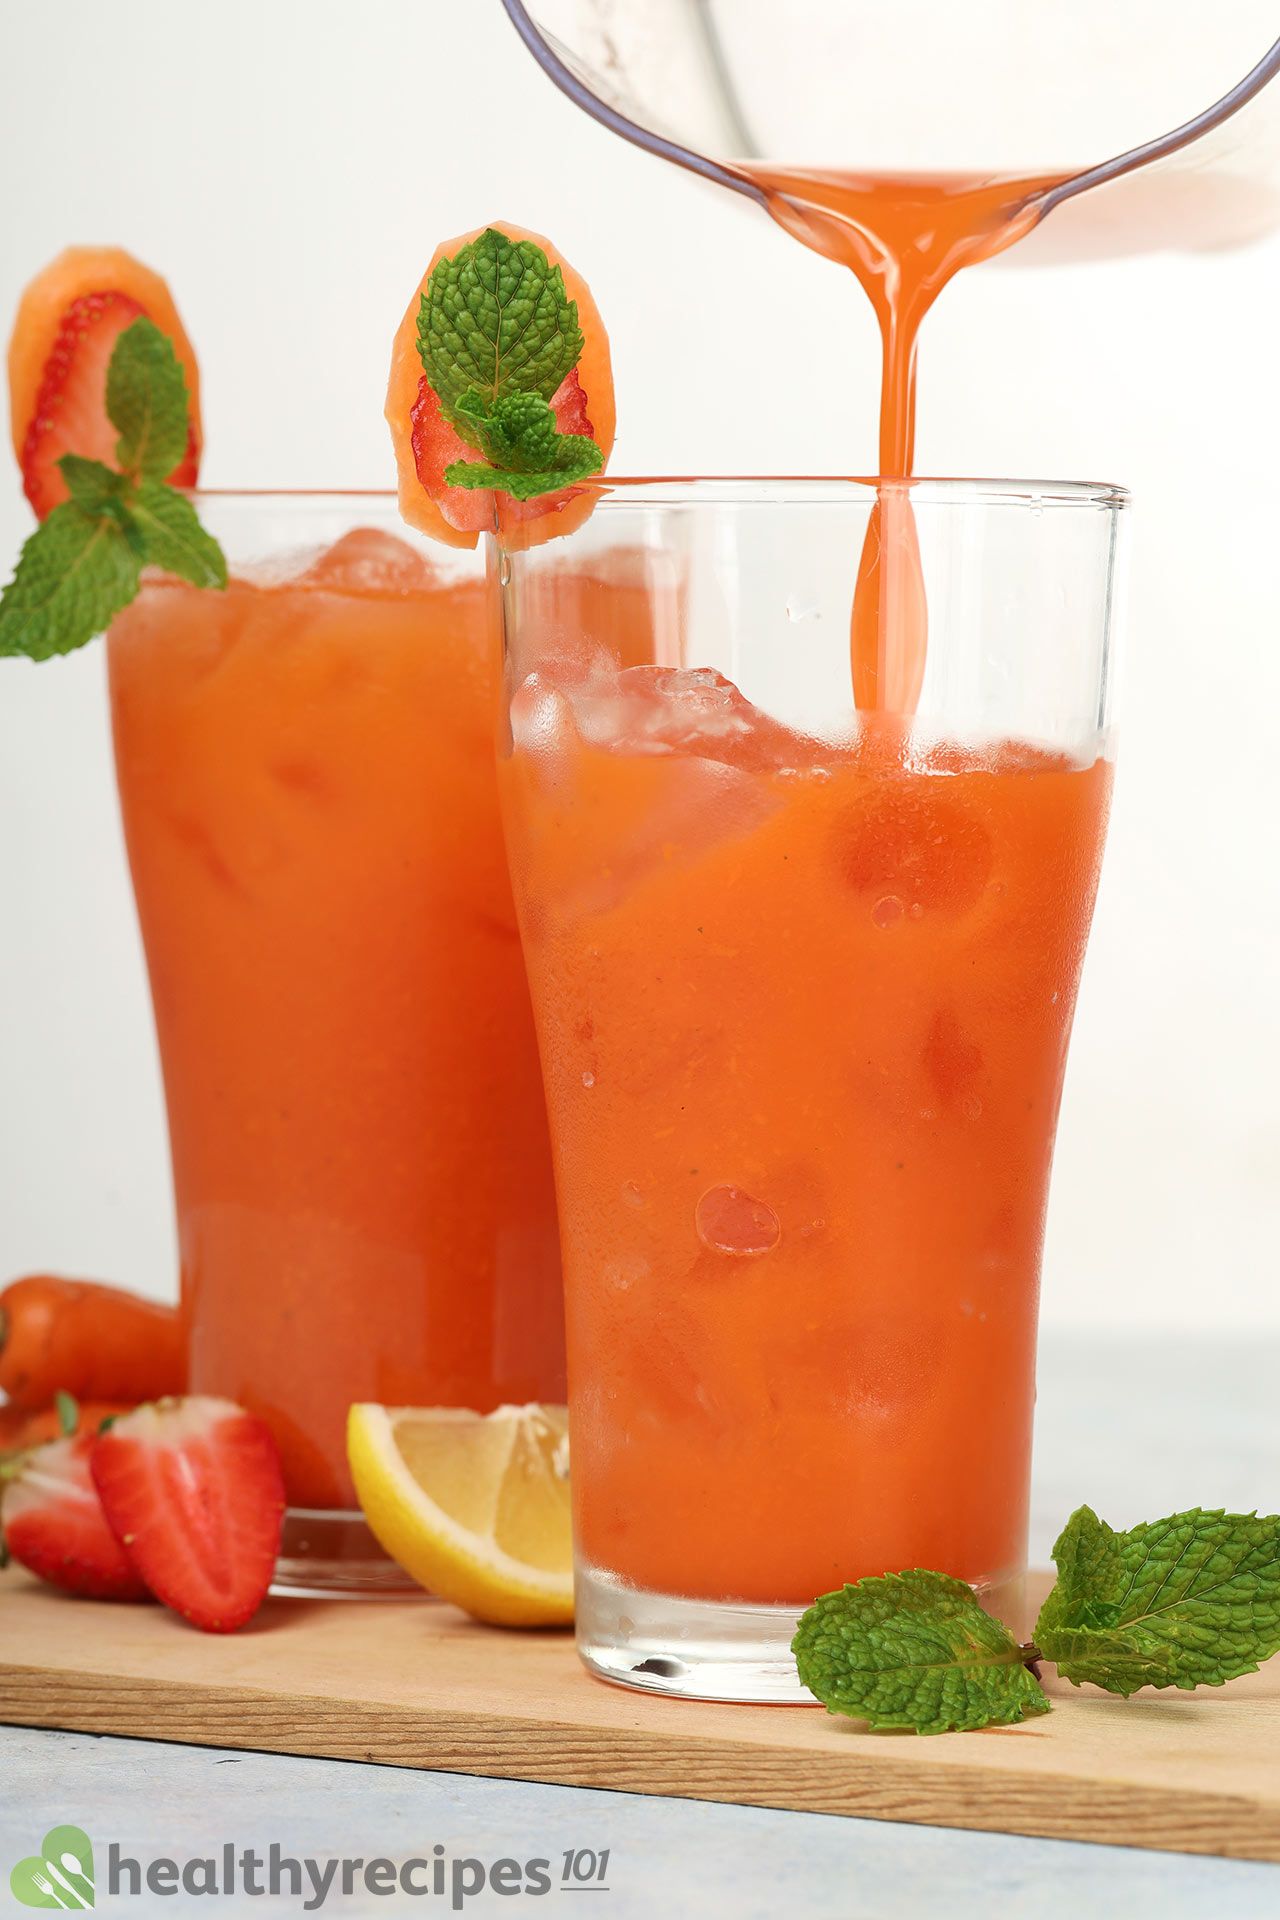 Is Strawberry Carrot Juice Healthy